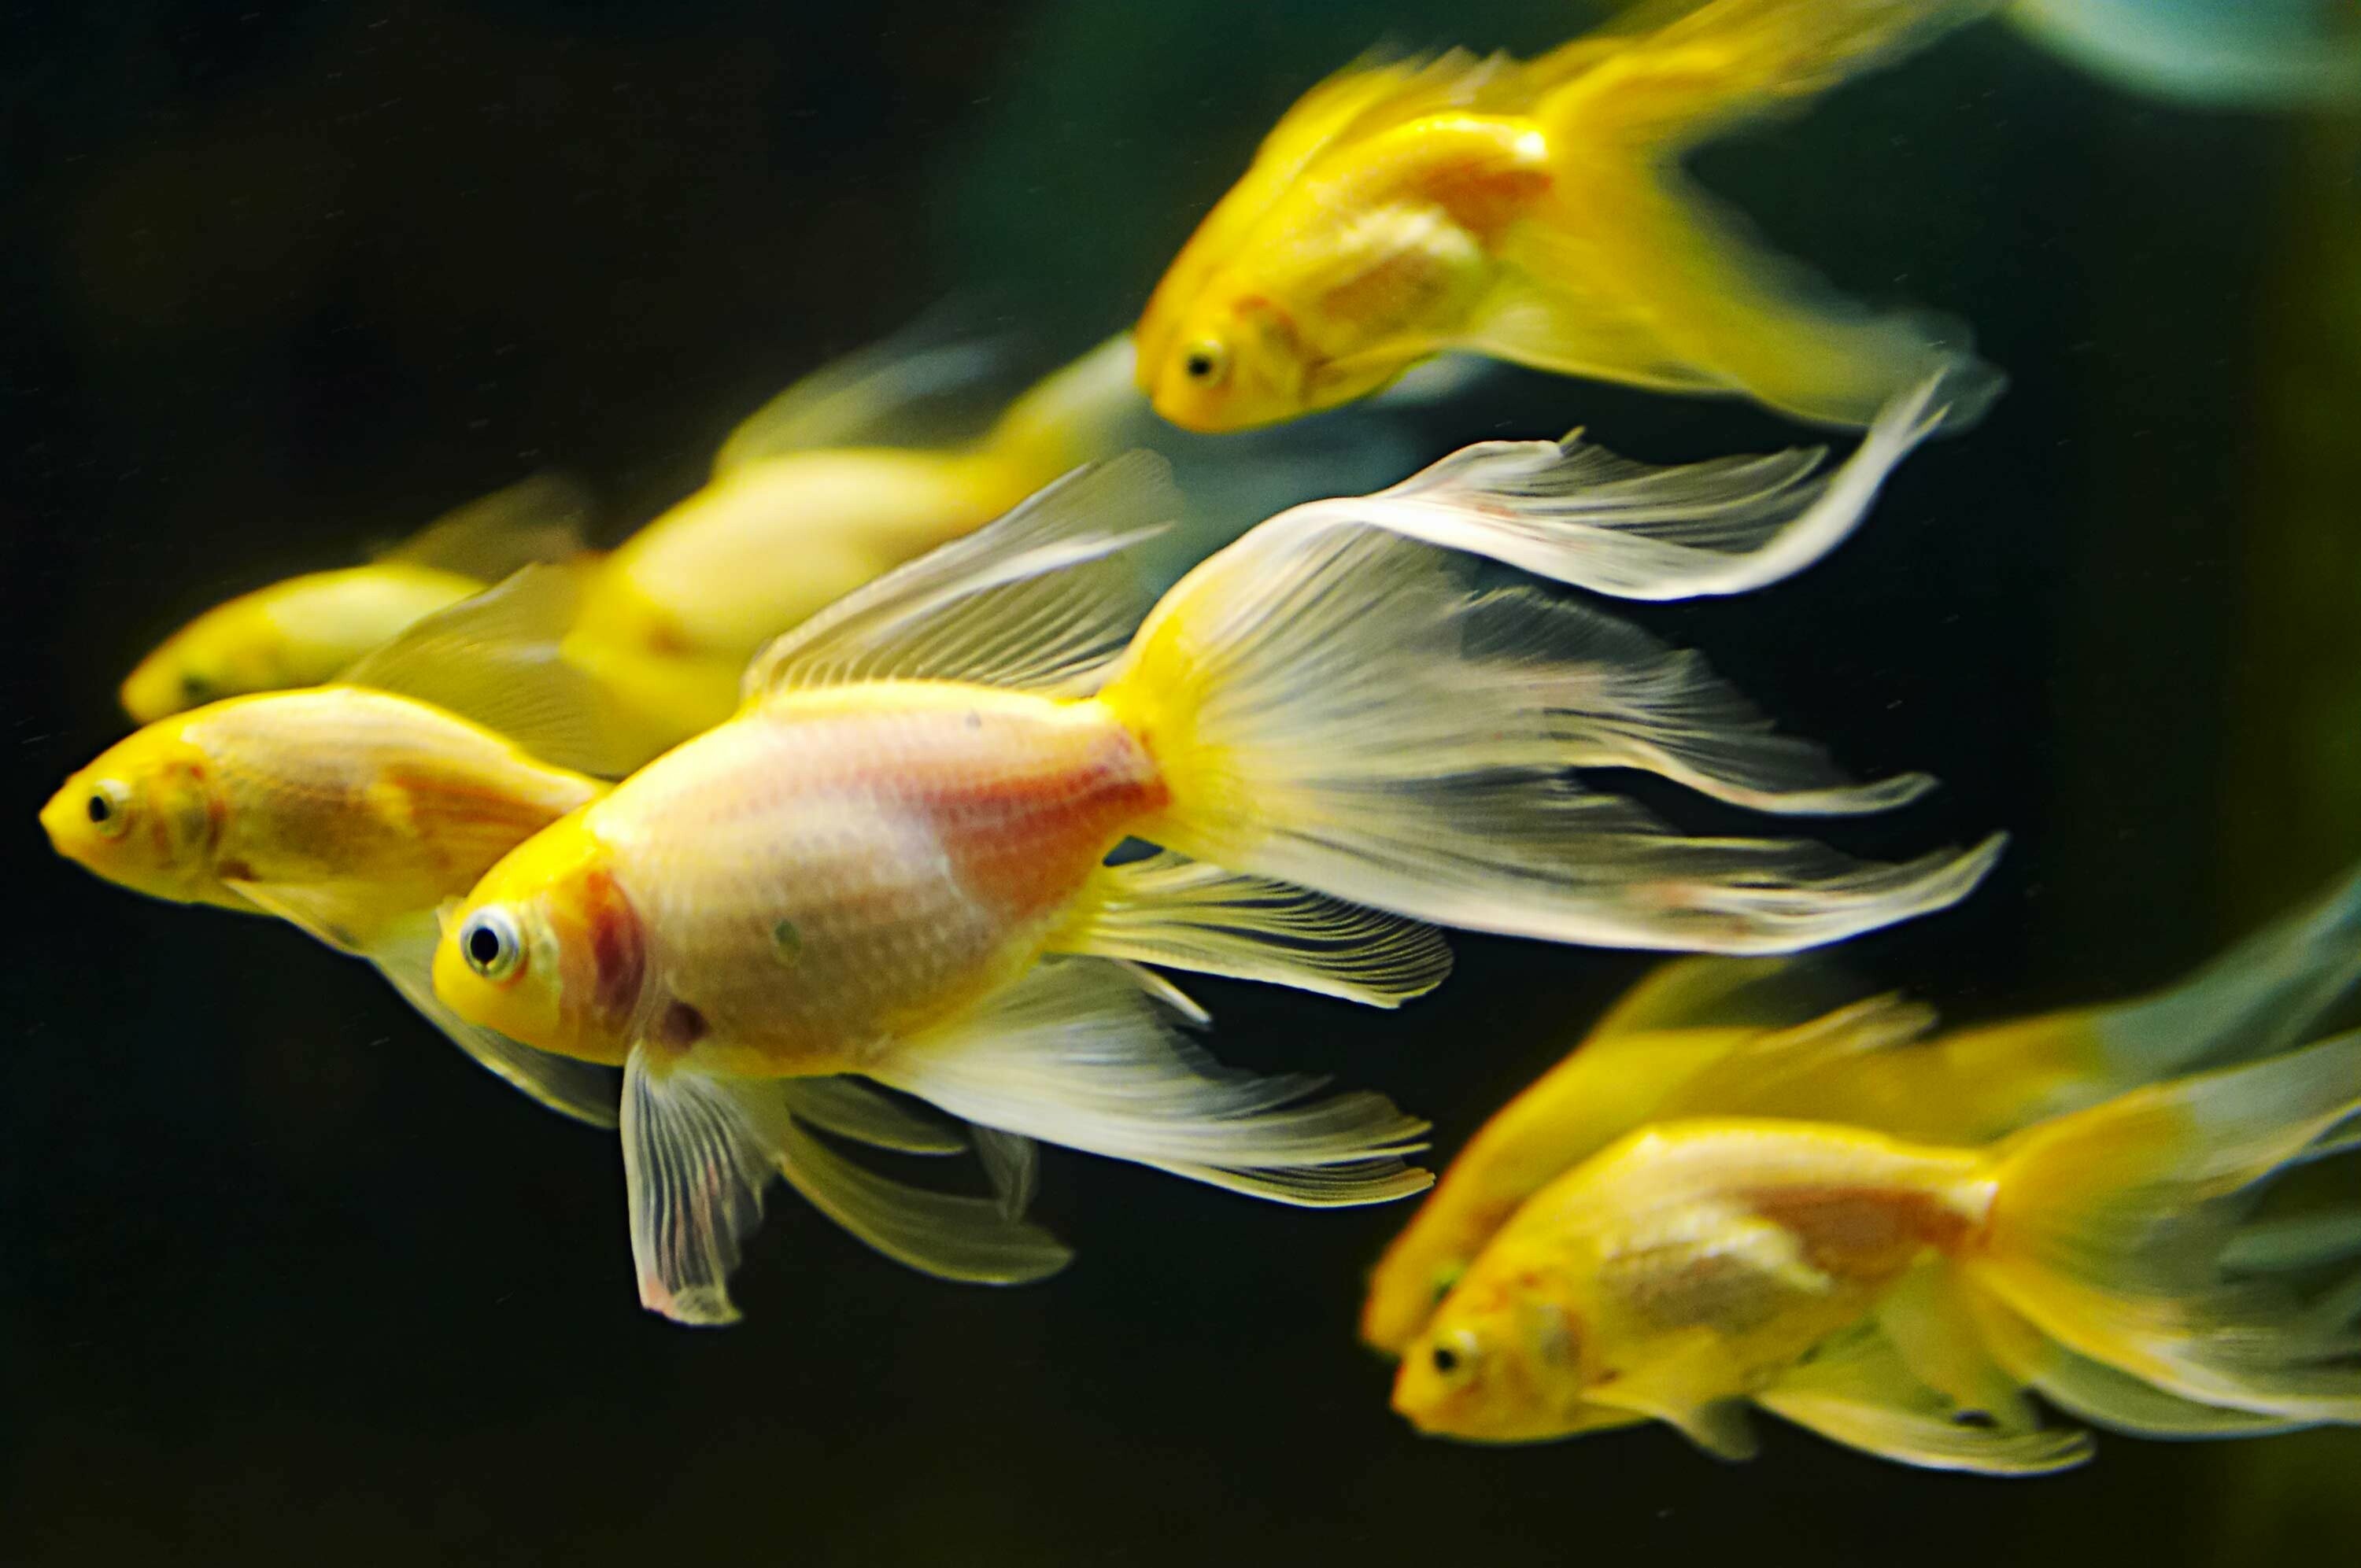 Fish: Goldfish, Aquatic species, Can deal with temperature fluctuations, changes in pH, cloudy water. 3000x2000 HD Wallpaper.